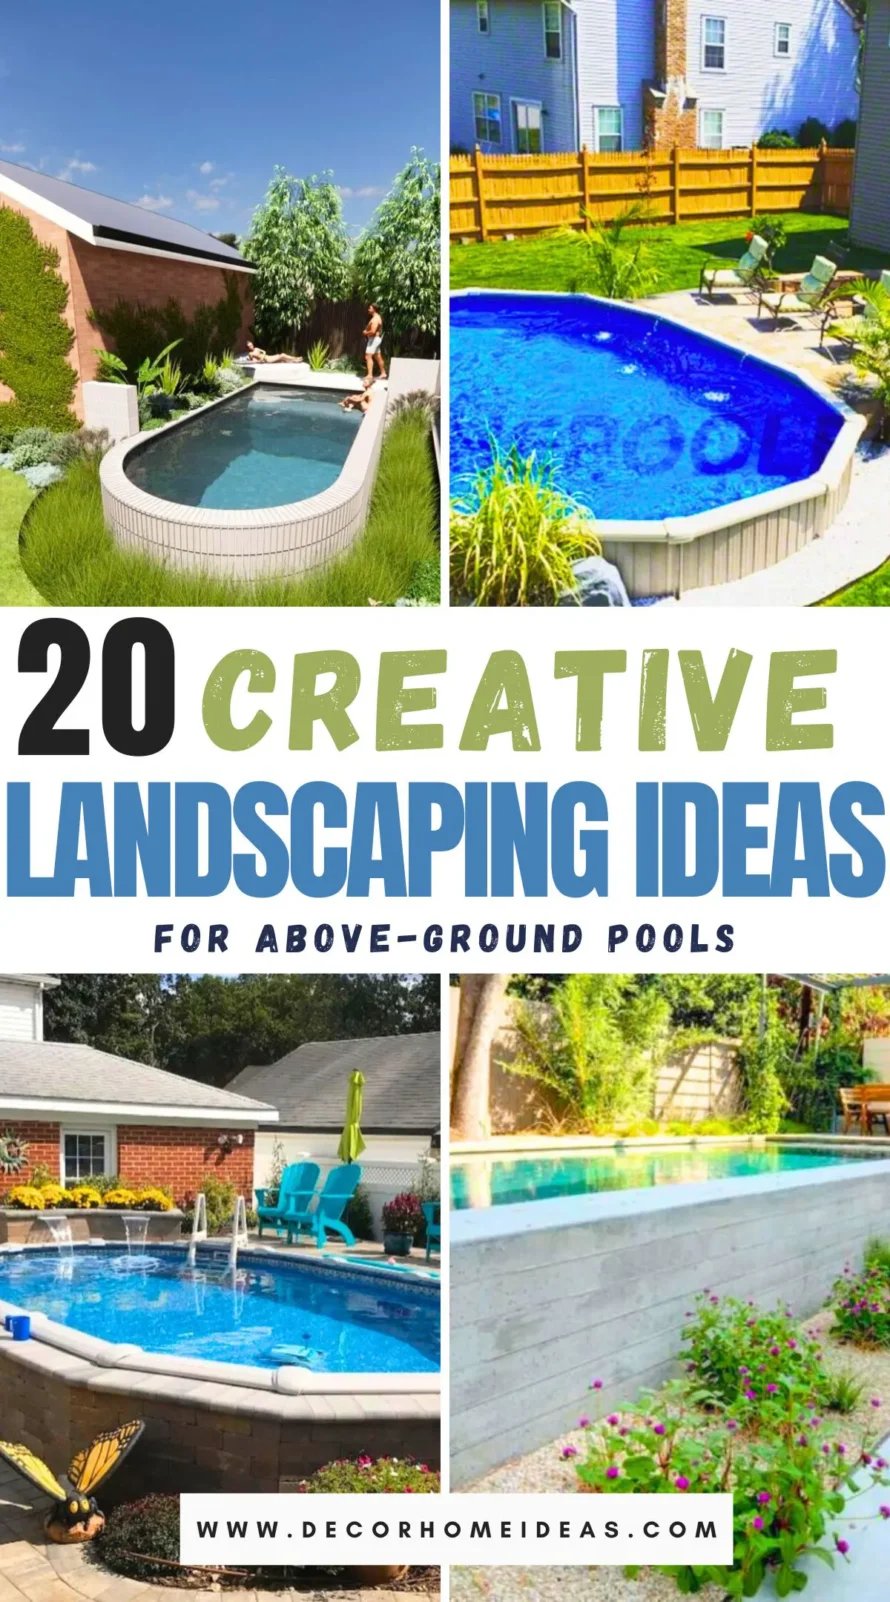 Transform your above-ground pool into a stunning backyard oasis with these 20 creative landscaping ideas. Discover how to use plants, lighting, and unique structures to enhance your pool area. From tropical themes to modern designs, these tips will inspire you to elevate your outdoor space. Dive in to learn more!